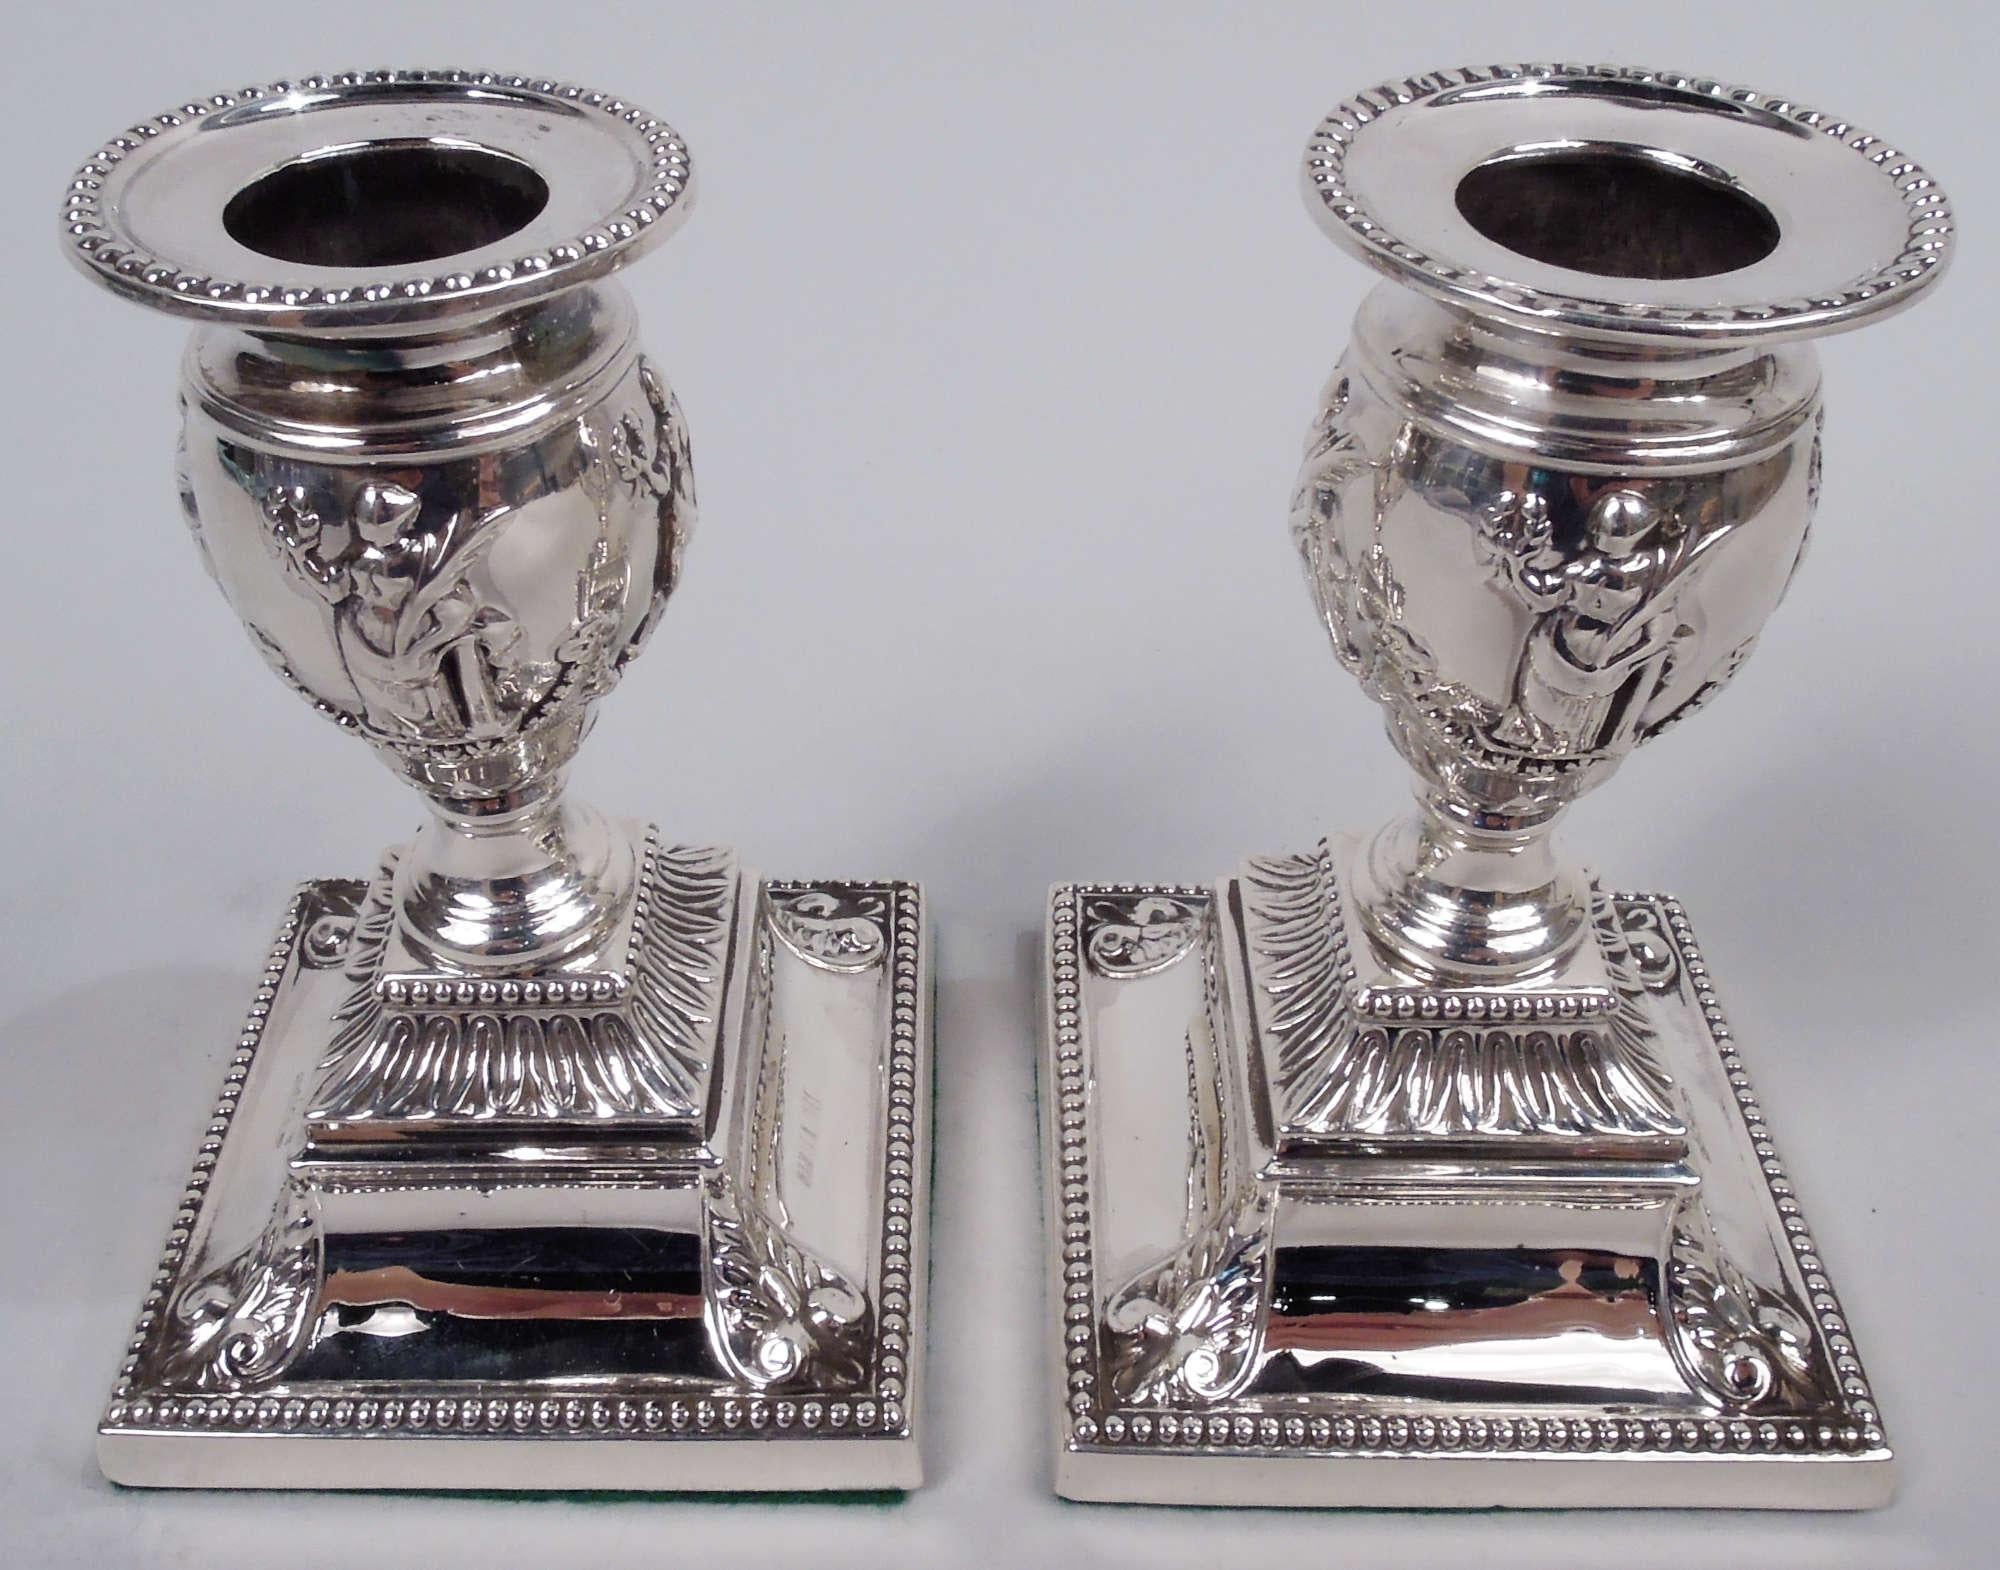 Pair of Victorian Classical sterling silver low candlesticks. Made by Richard Hodd & Son in London in 1881. Each: Ovoid socket with bobeche on spool support mounted to stepped square base with scrolling leaves at corners. In low relief draped